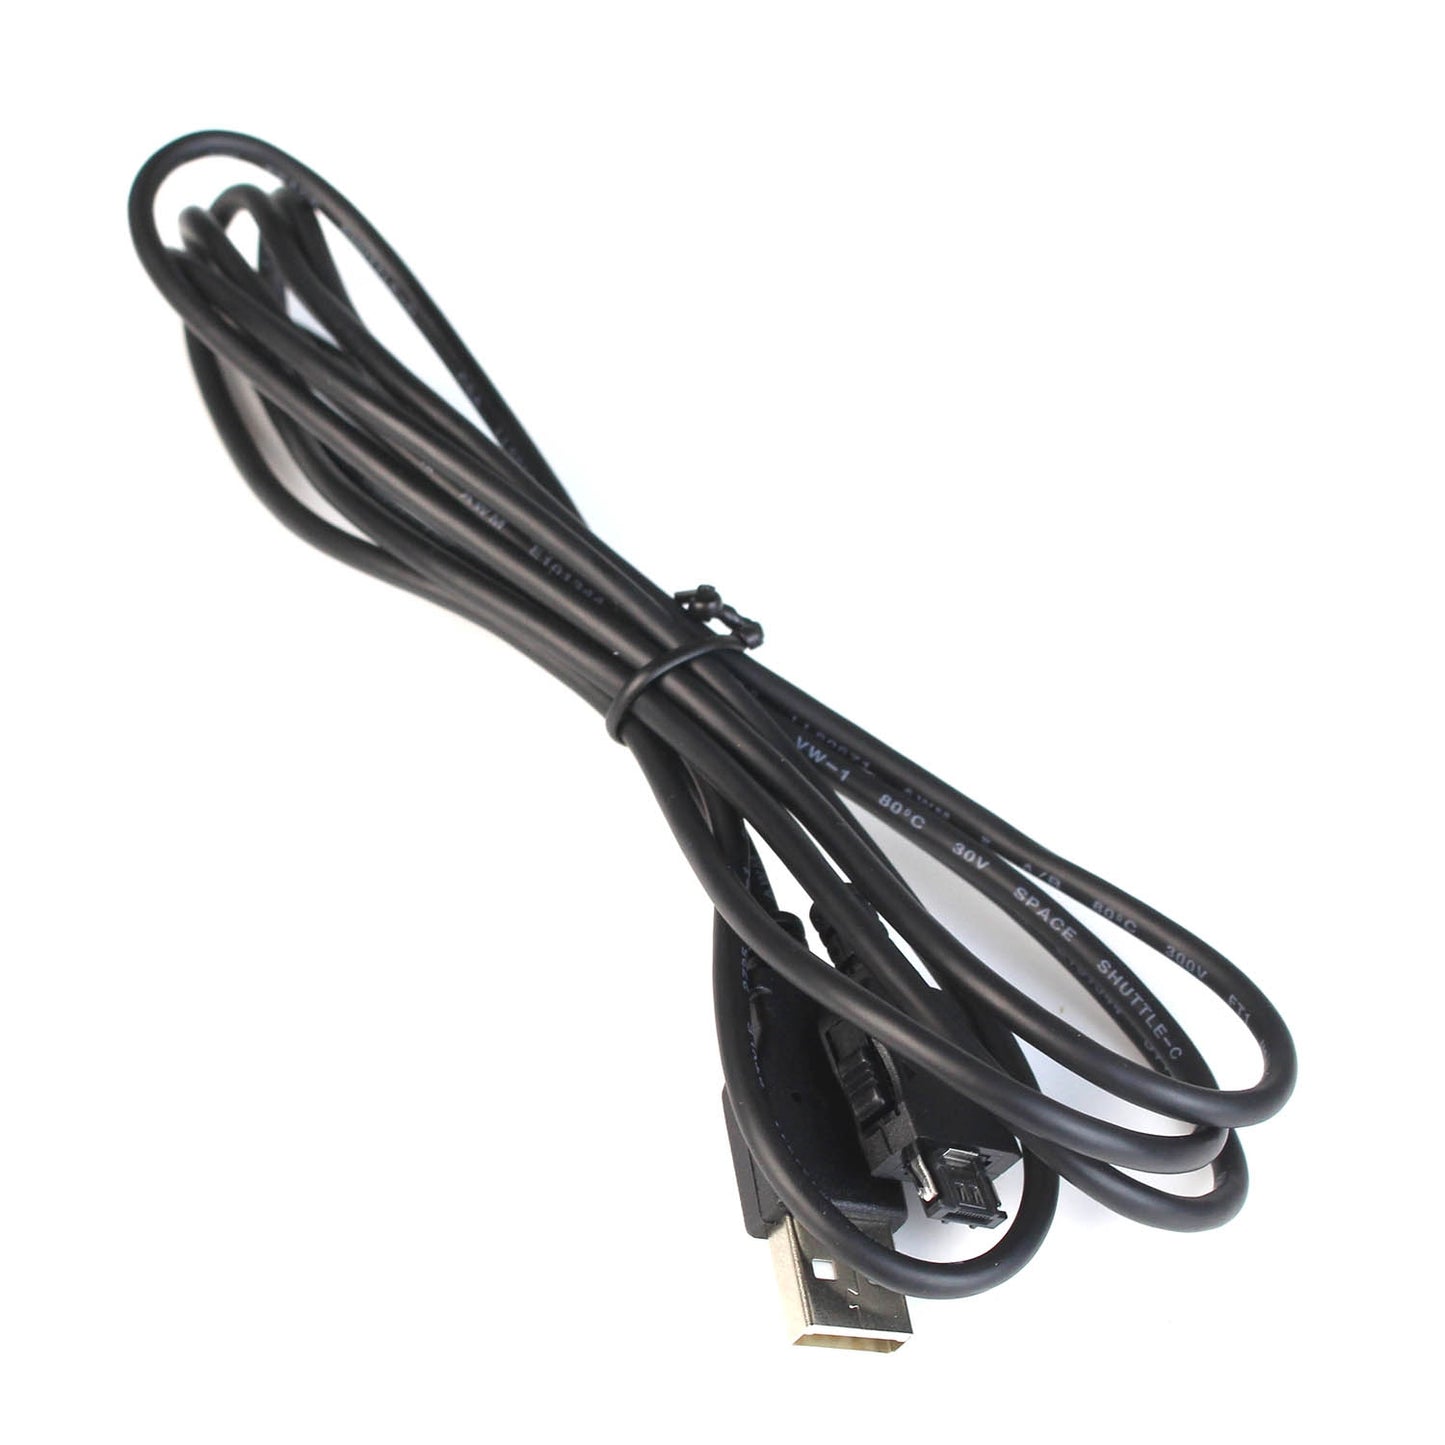 PC Connection Cable For Micro1 Handheld Spirometer